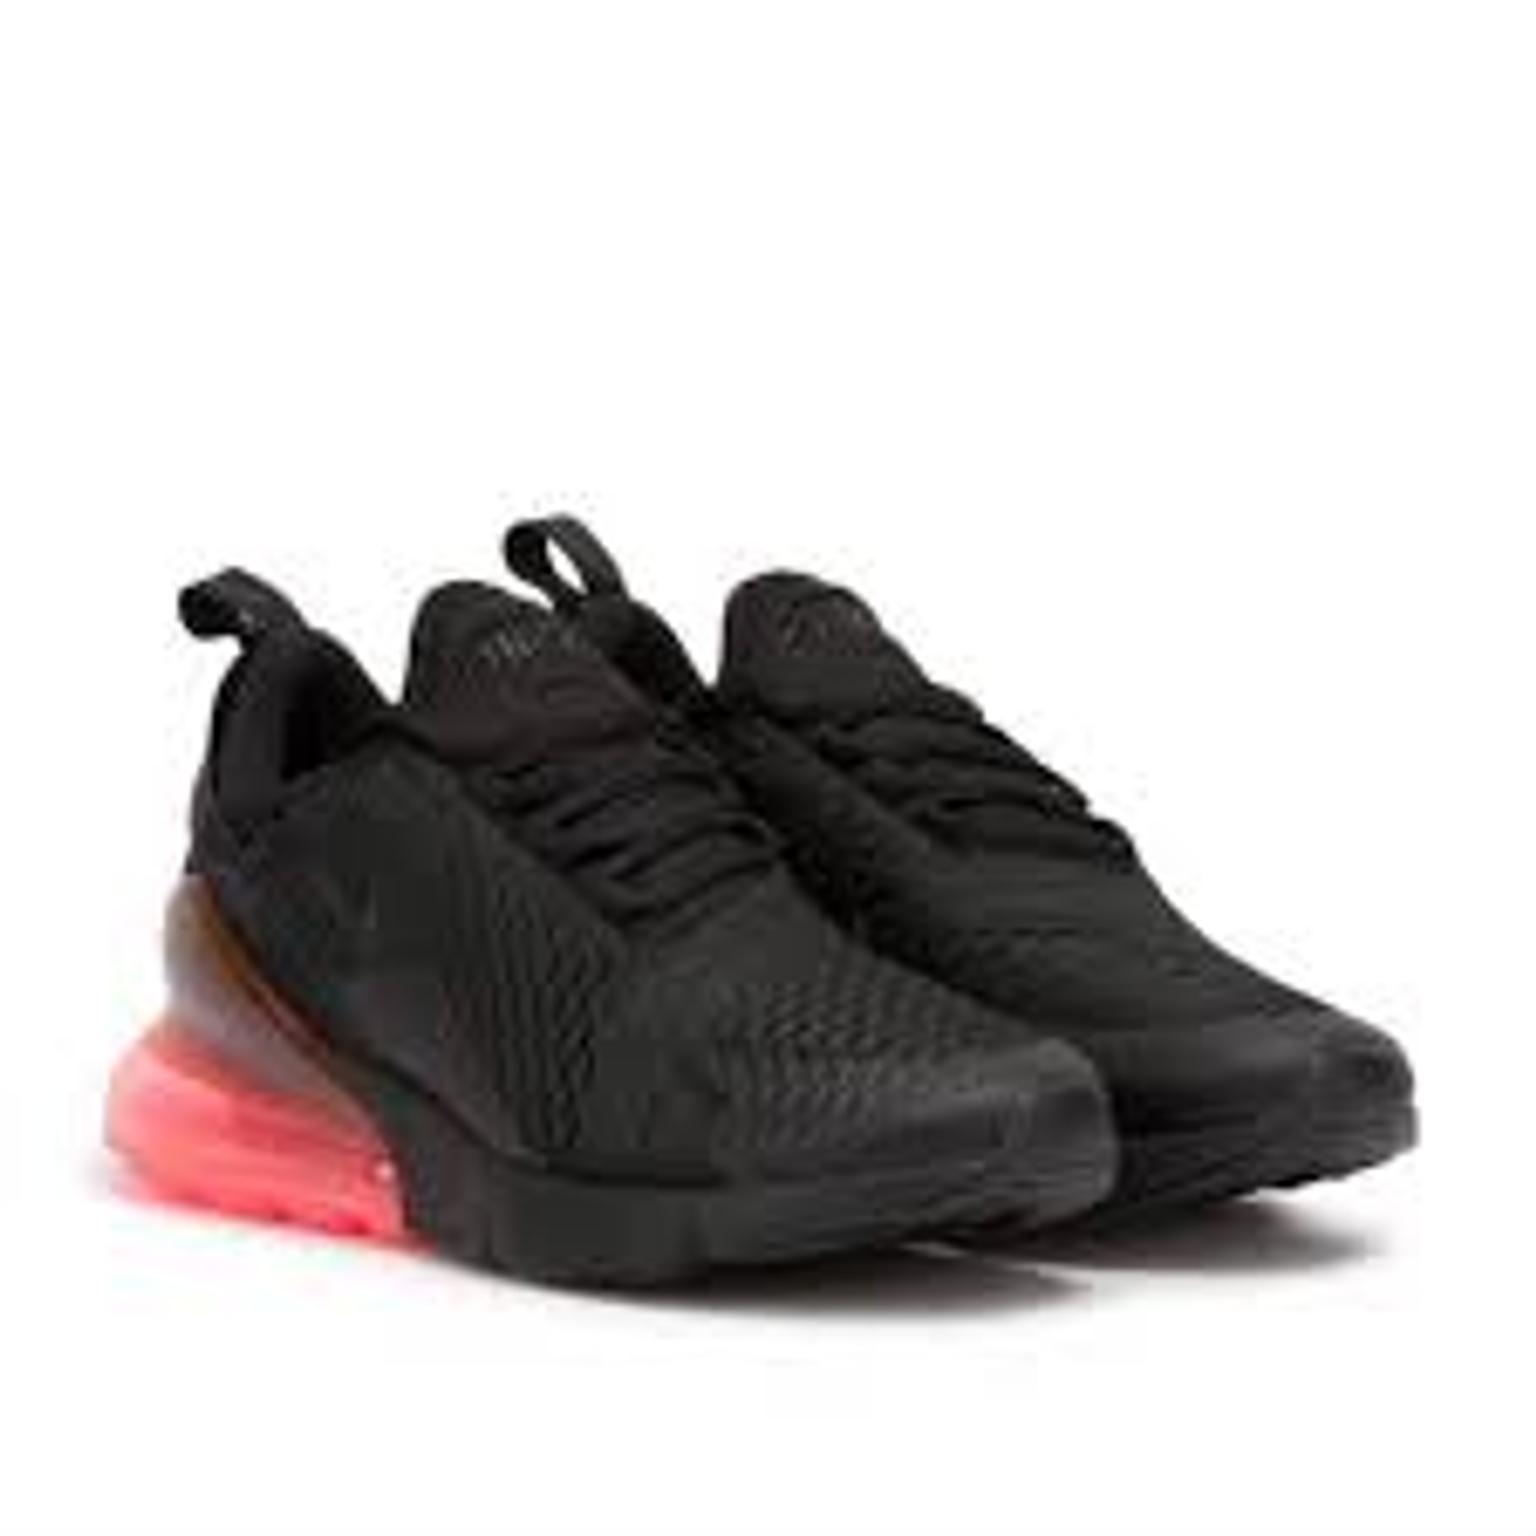 nike air max 270 youth size 5